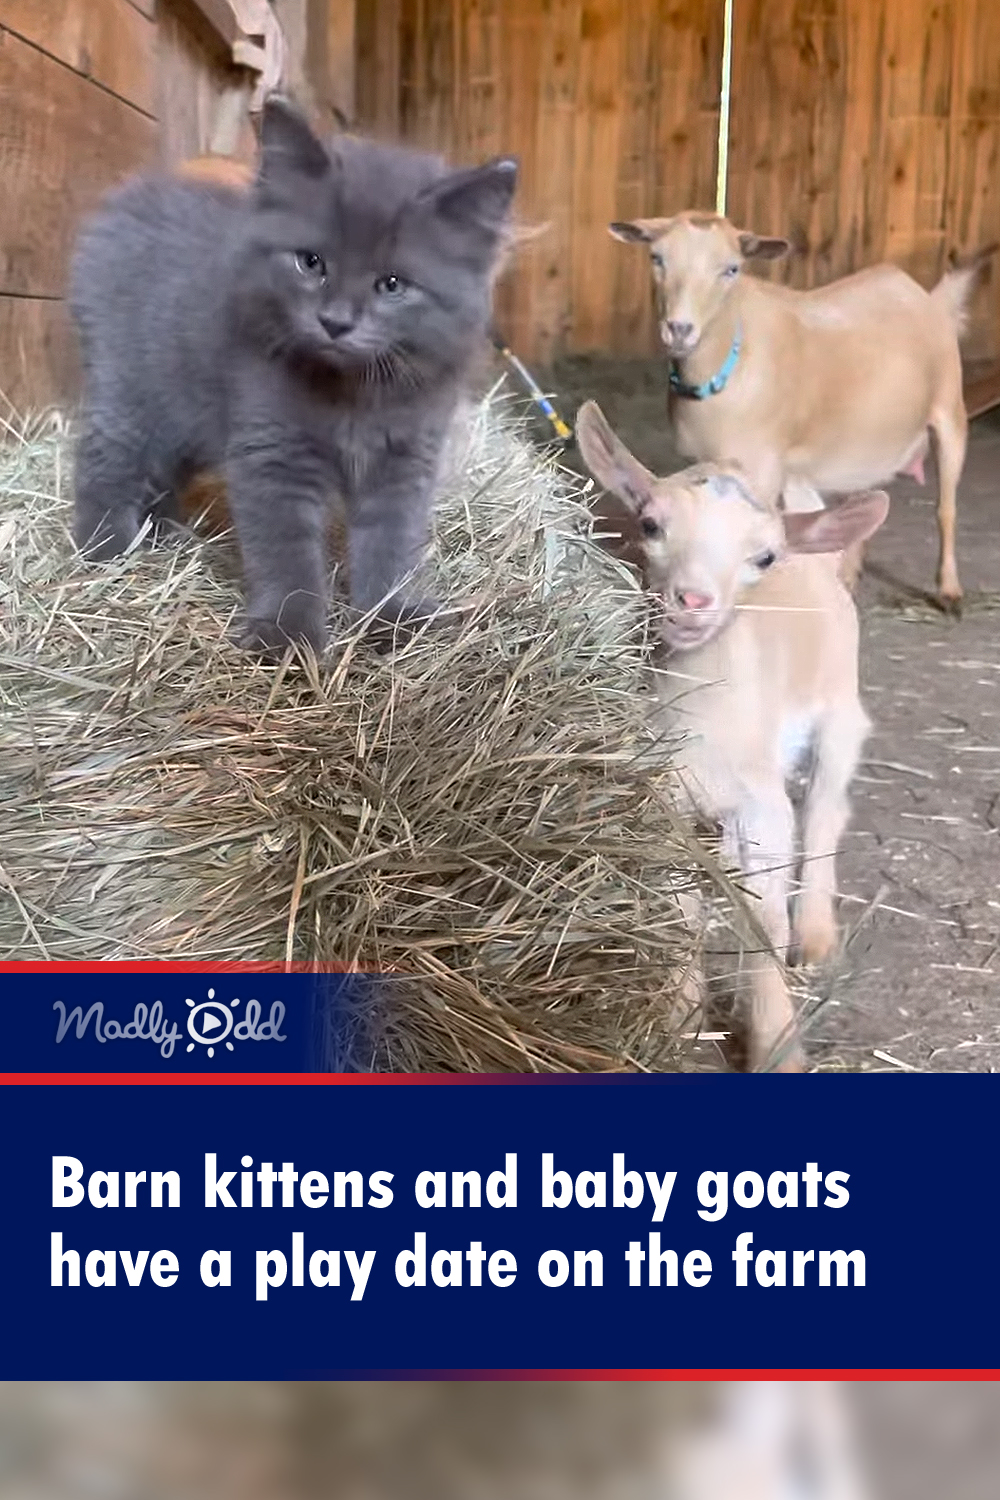 Barn kittens and baby goats have a play date on the farm